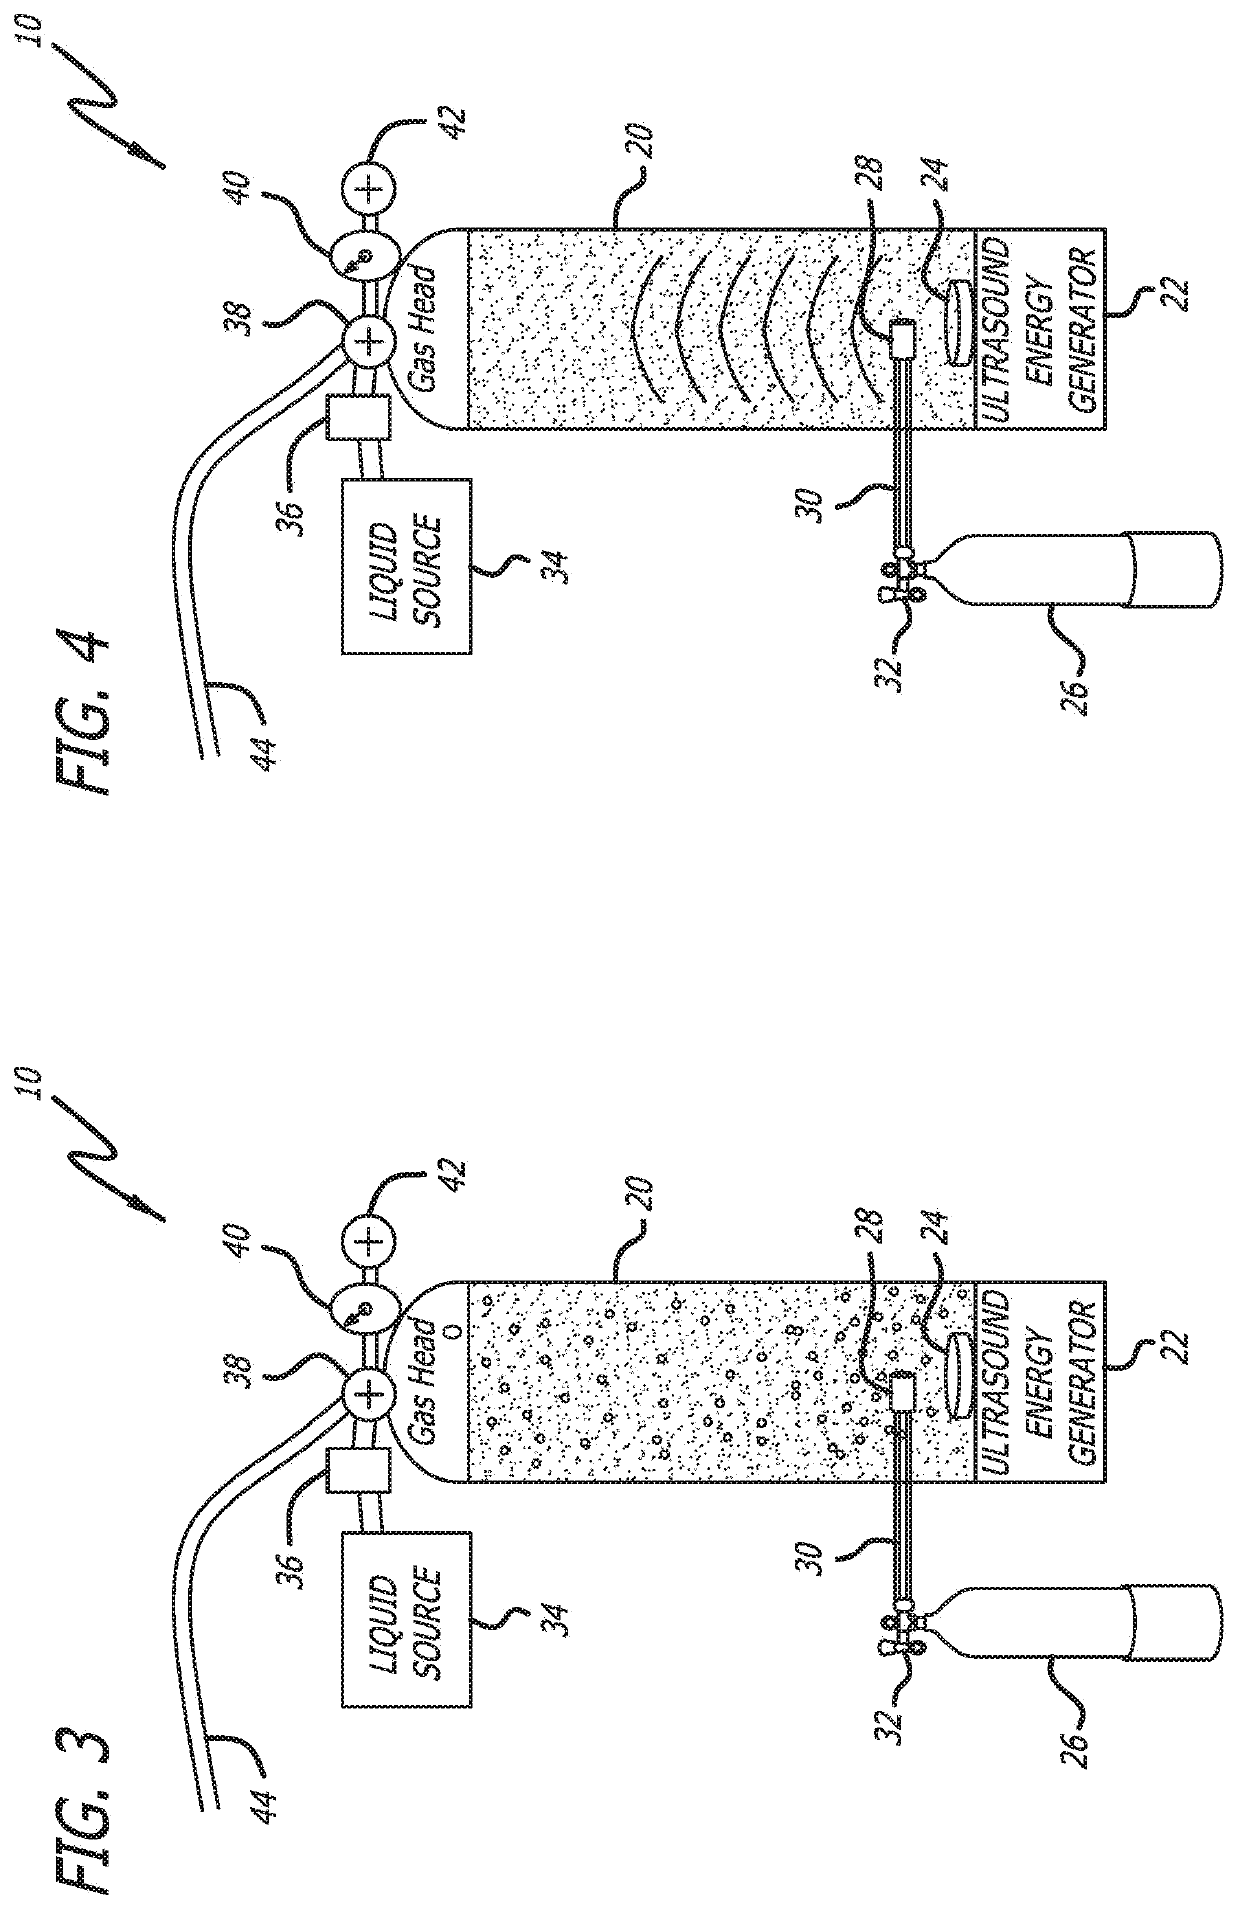 Devices And Methods To Infuse Gases Into And Out Of Blood